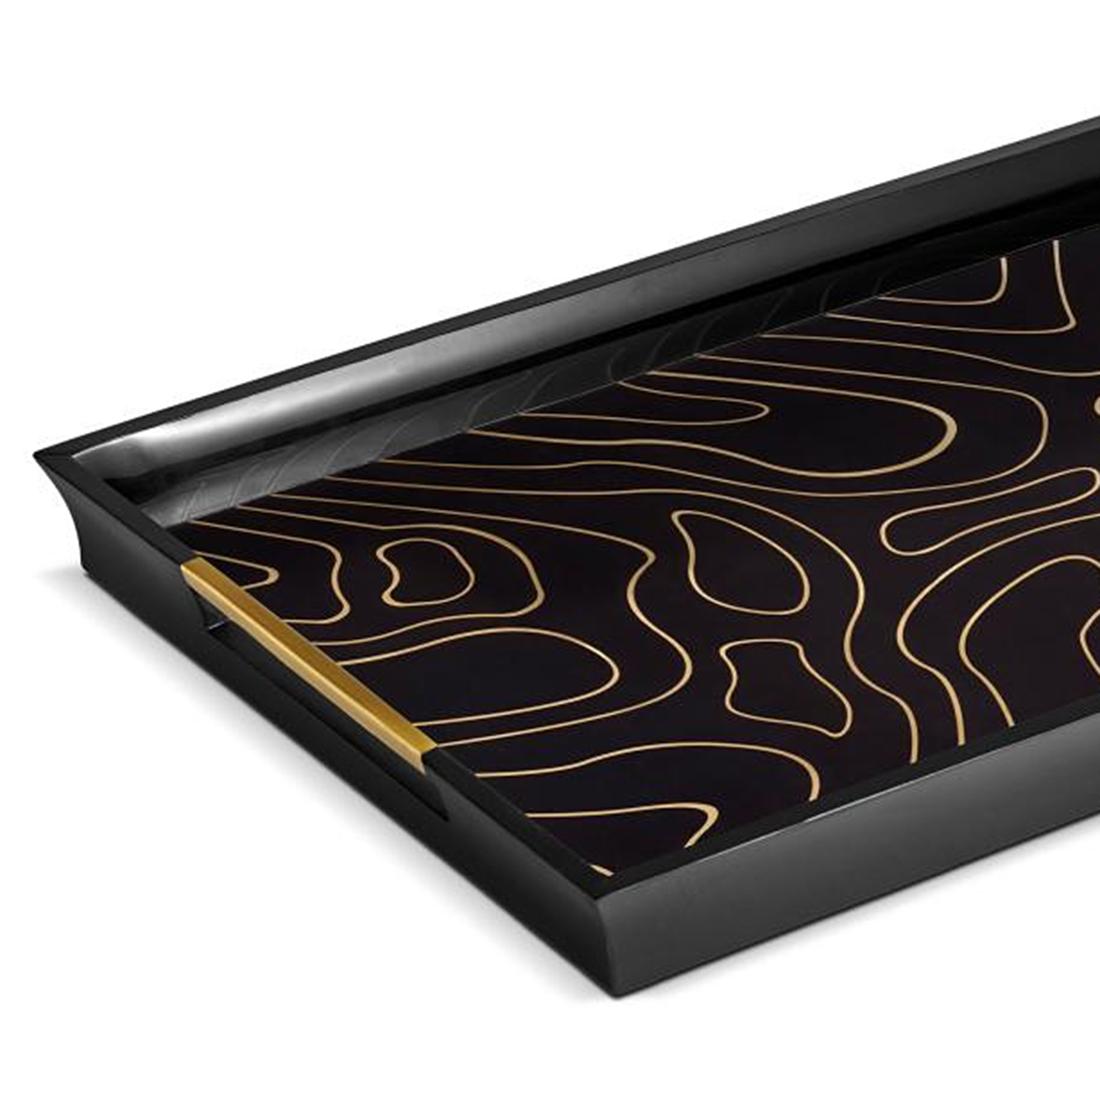 Tray Athenee all with black resin and gold trims.
With brass handles.
Subtle piece with luxury gift box included.